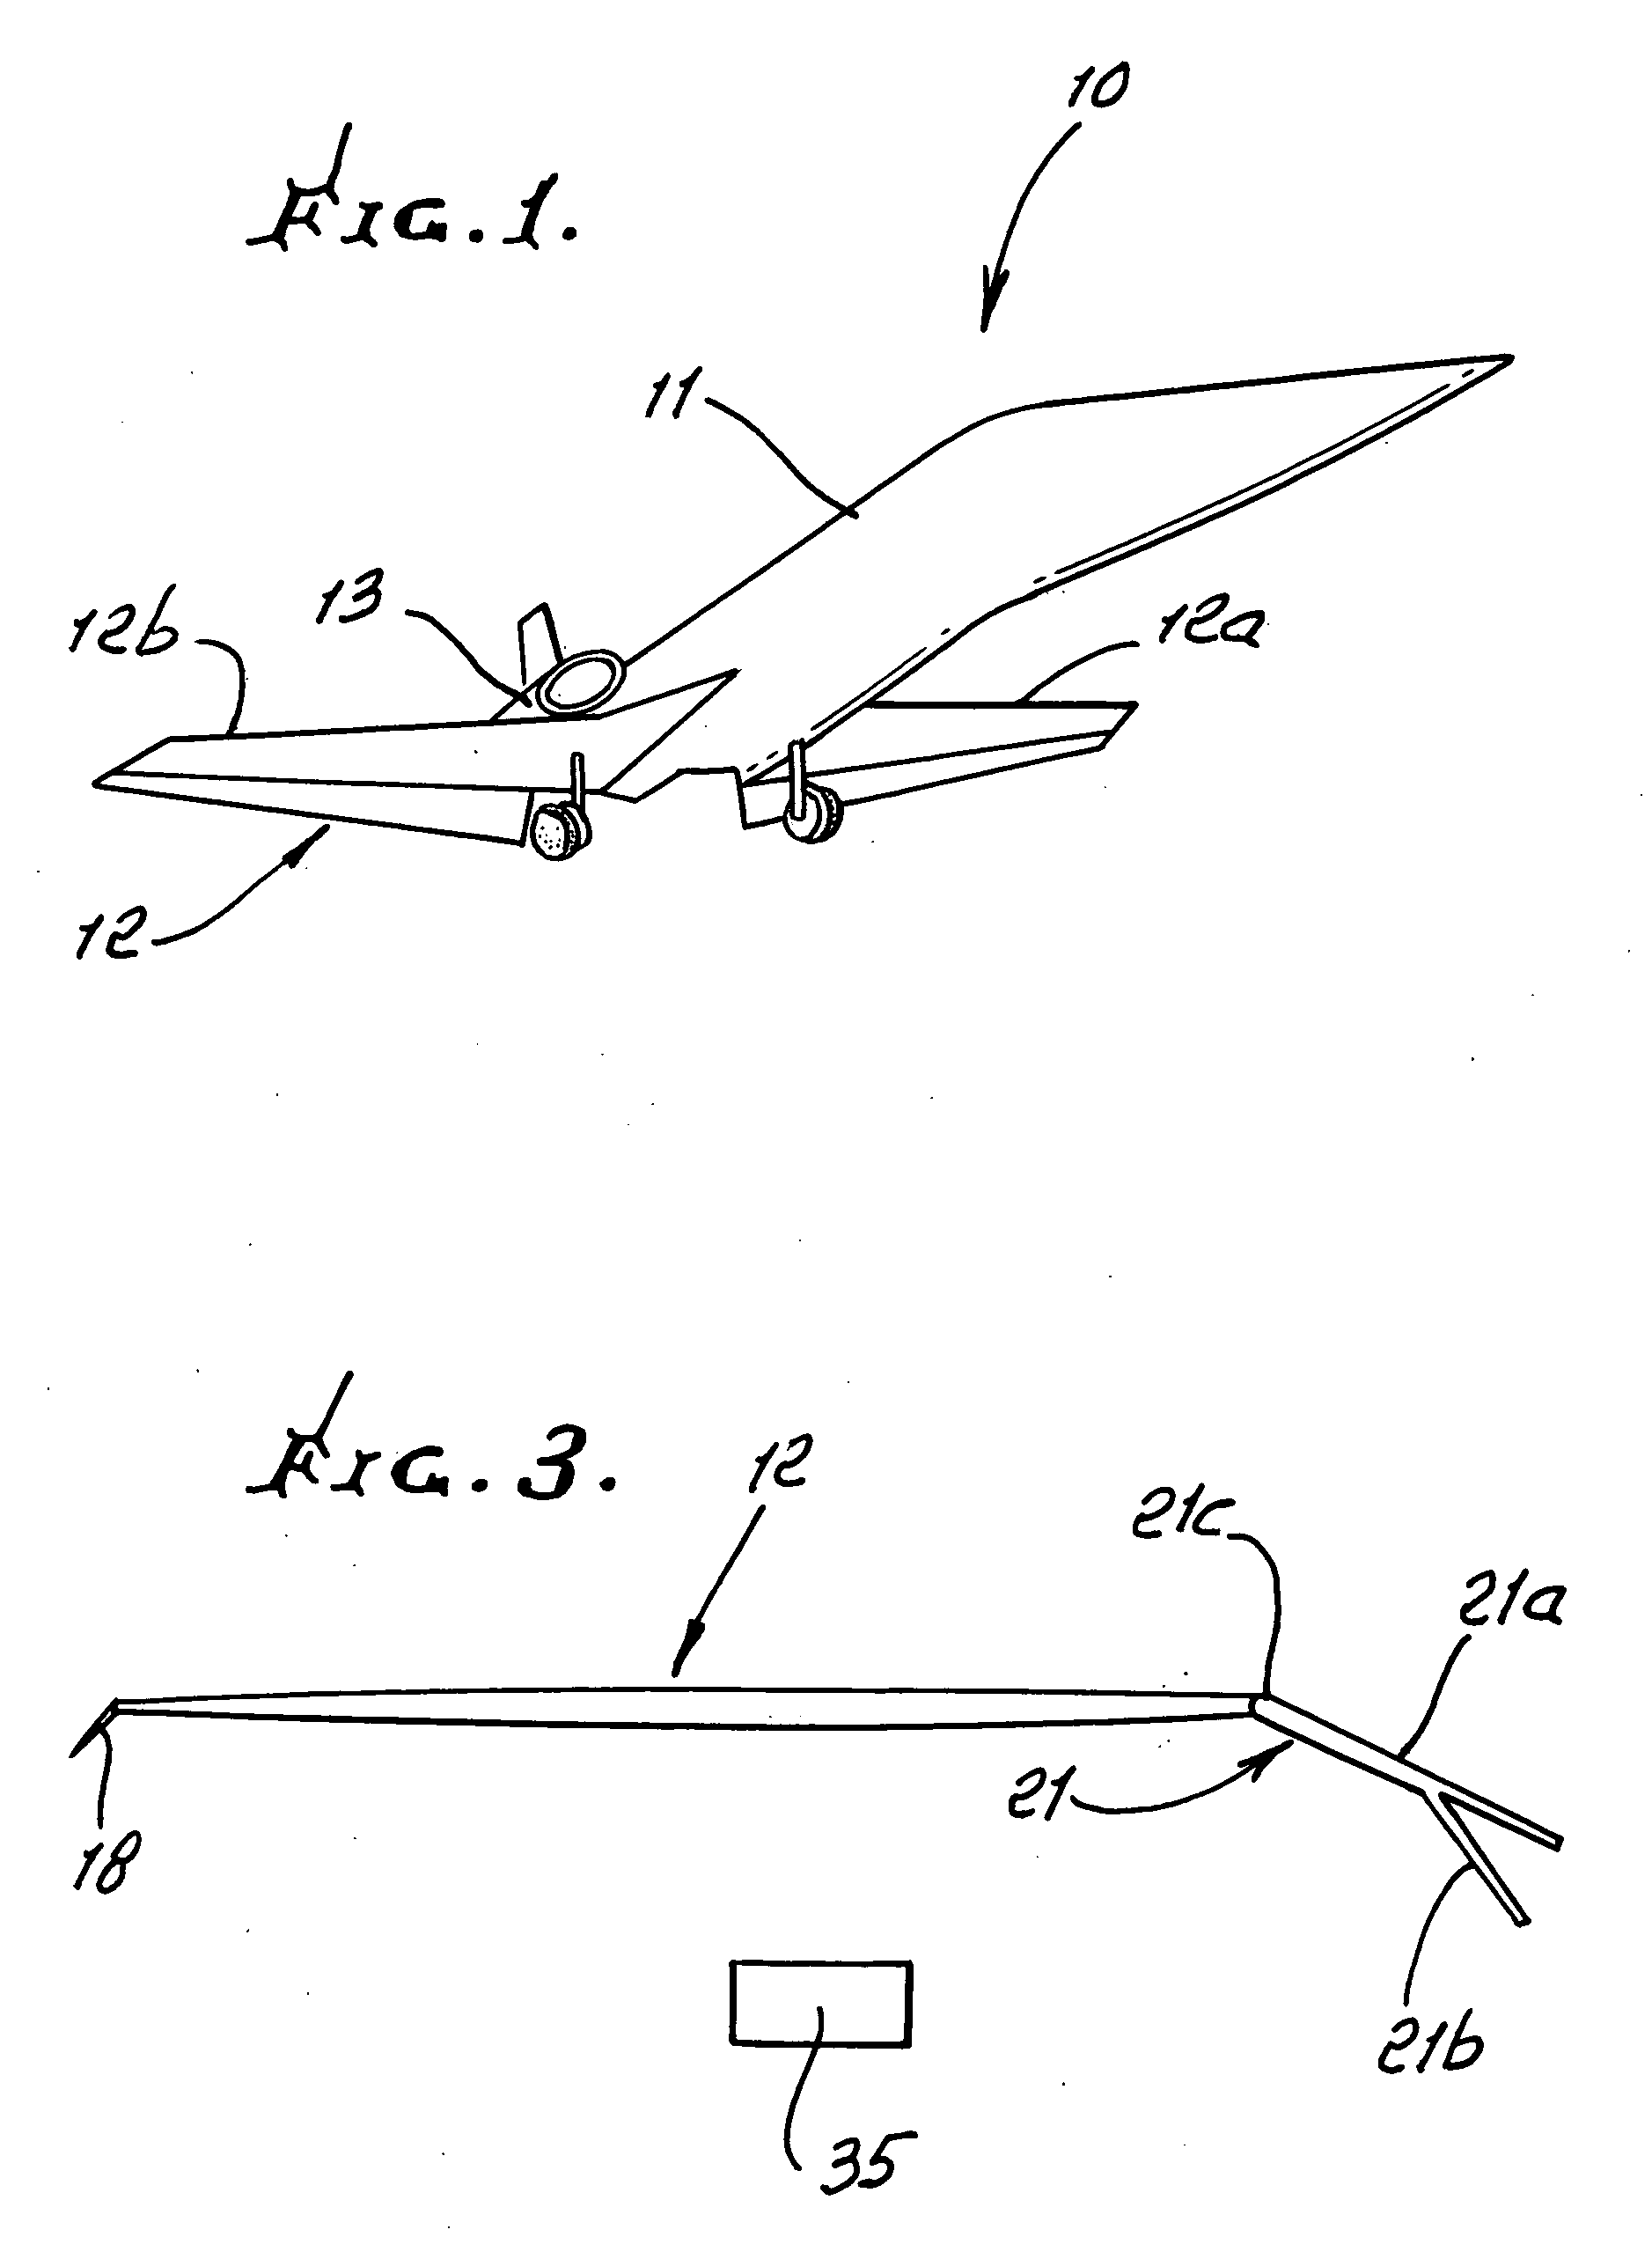 Highly efficient supersonic laminar flow wing